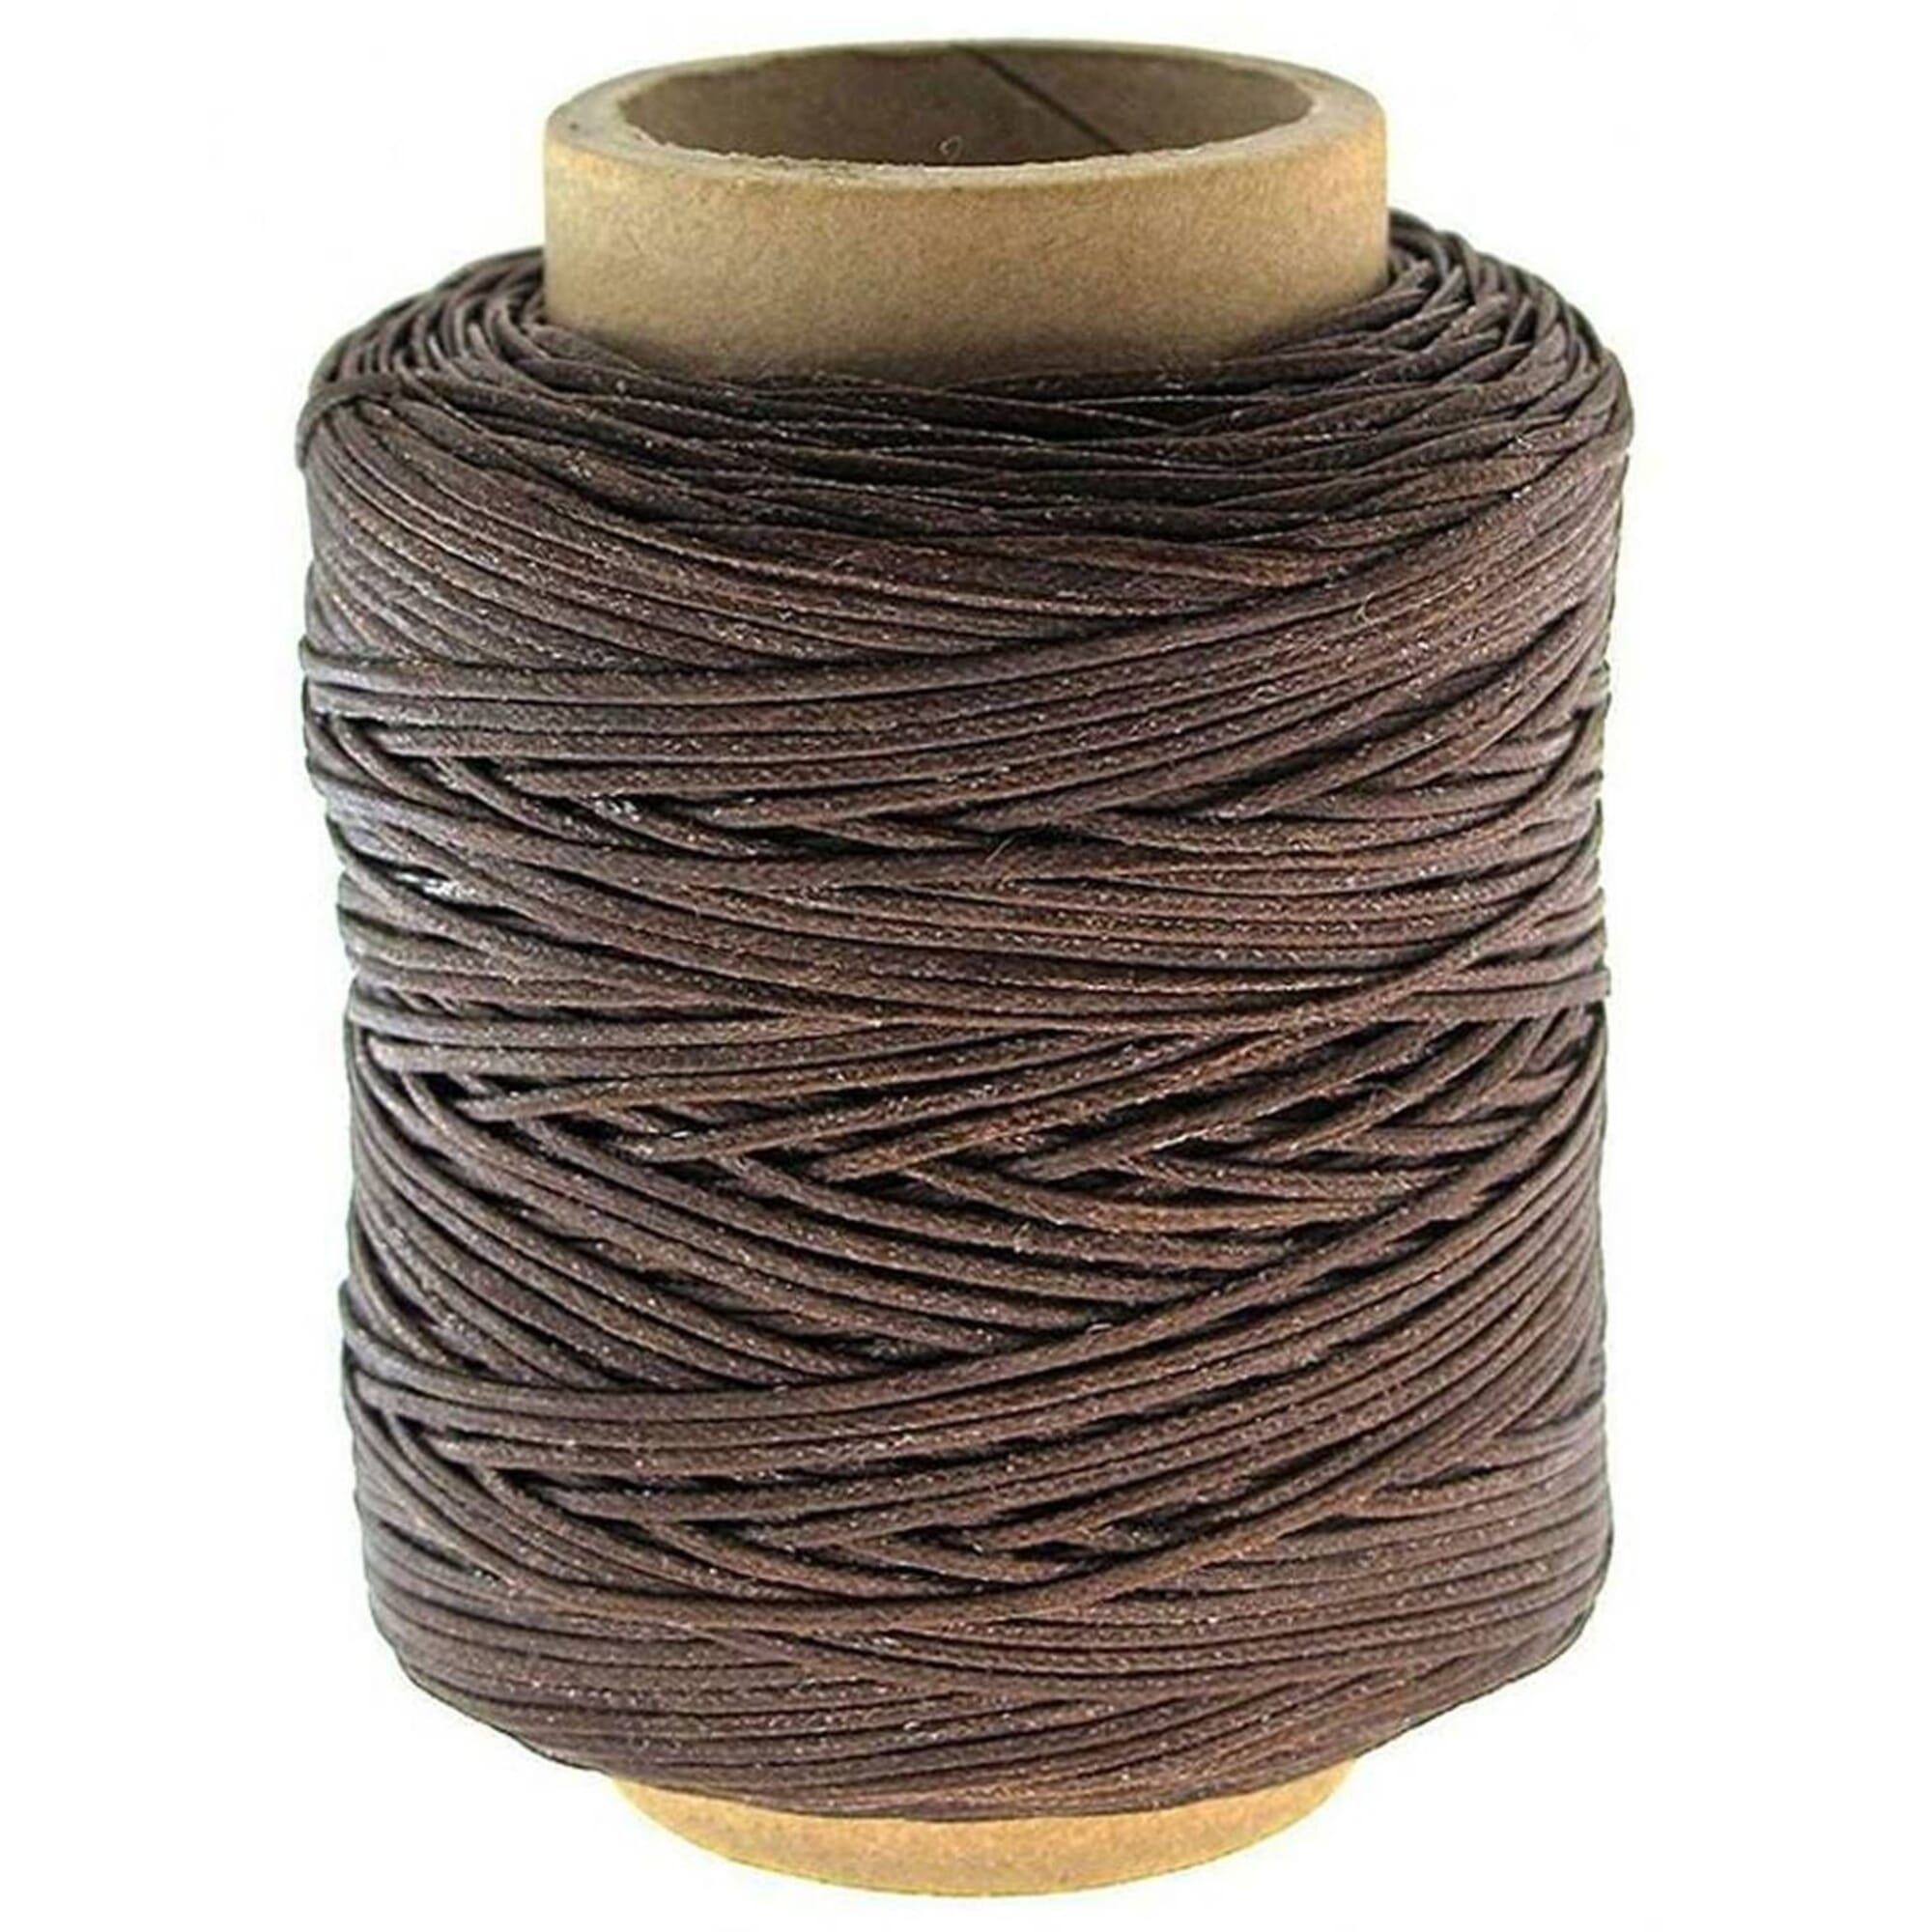 Waxed Linen Thread for Leatherworking